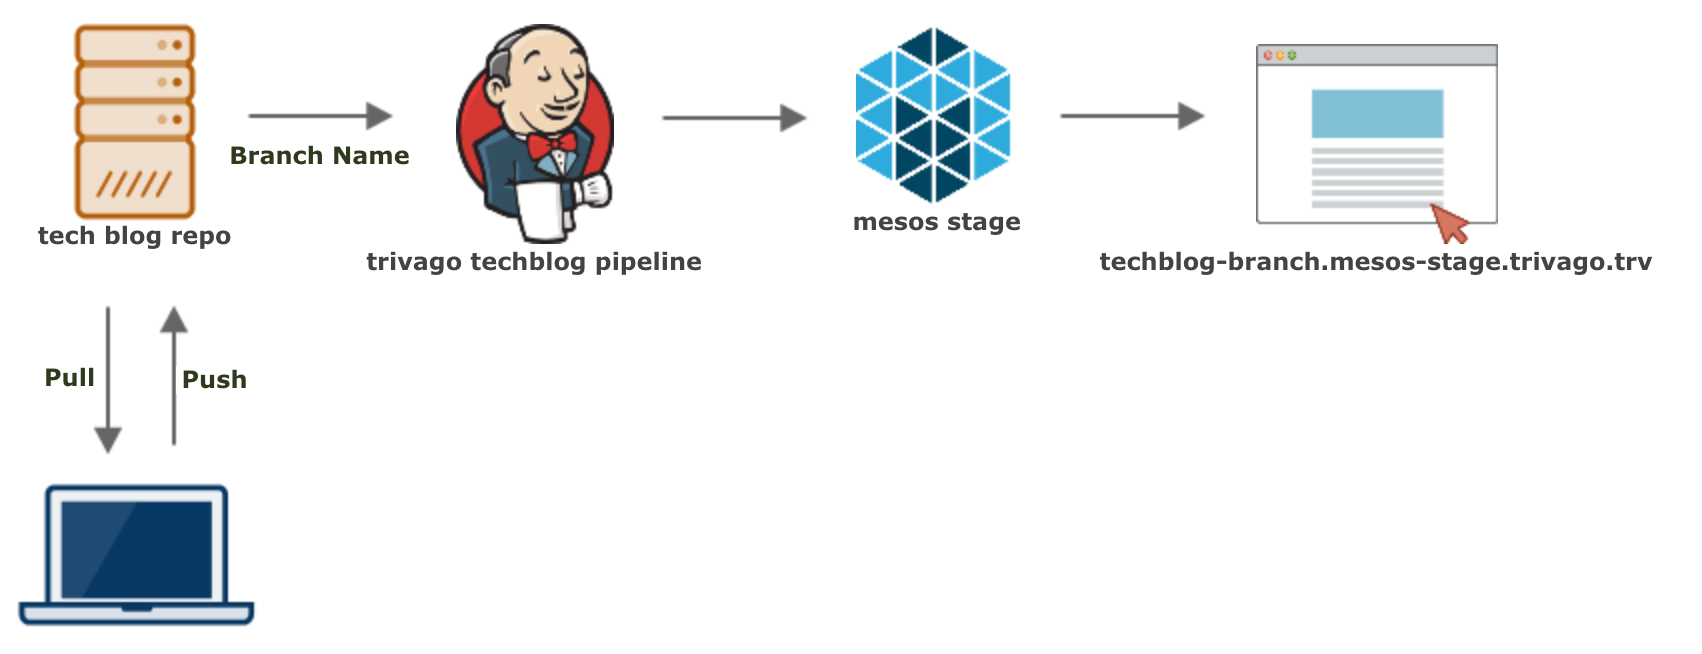 A diagram showing the state deployment pipeline. A user clones and pushes to the repo., which triggers Jenkins, which is then deployed on a Mesos staging server.